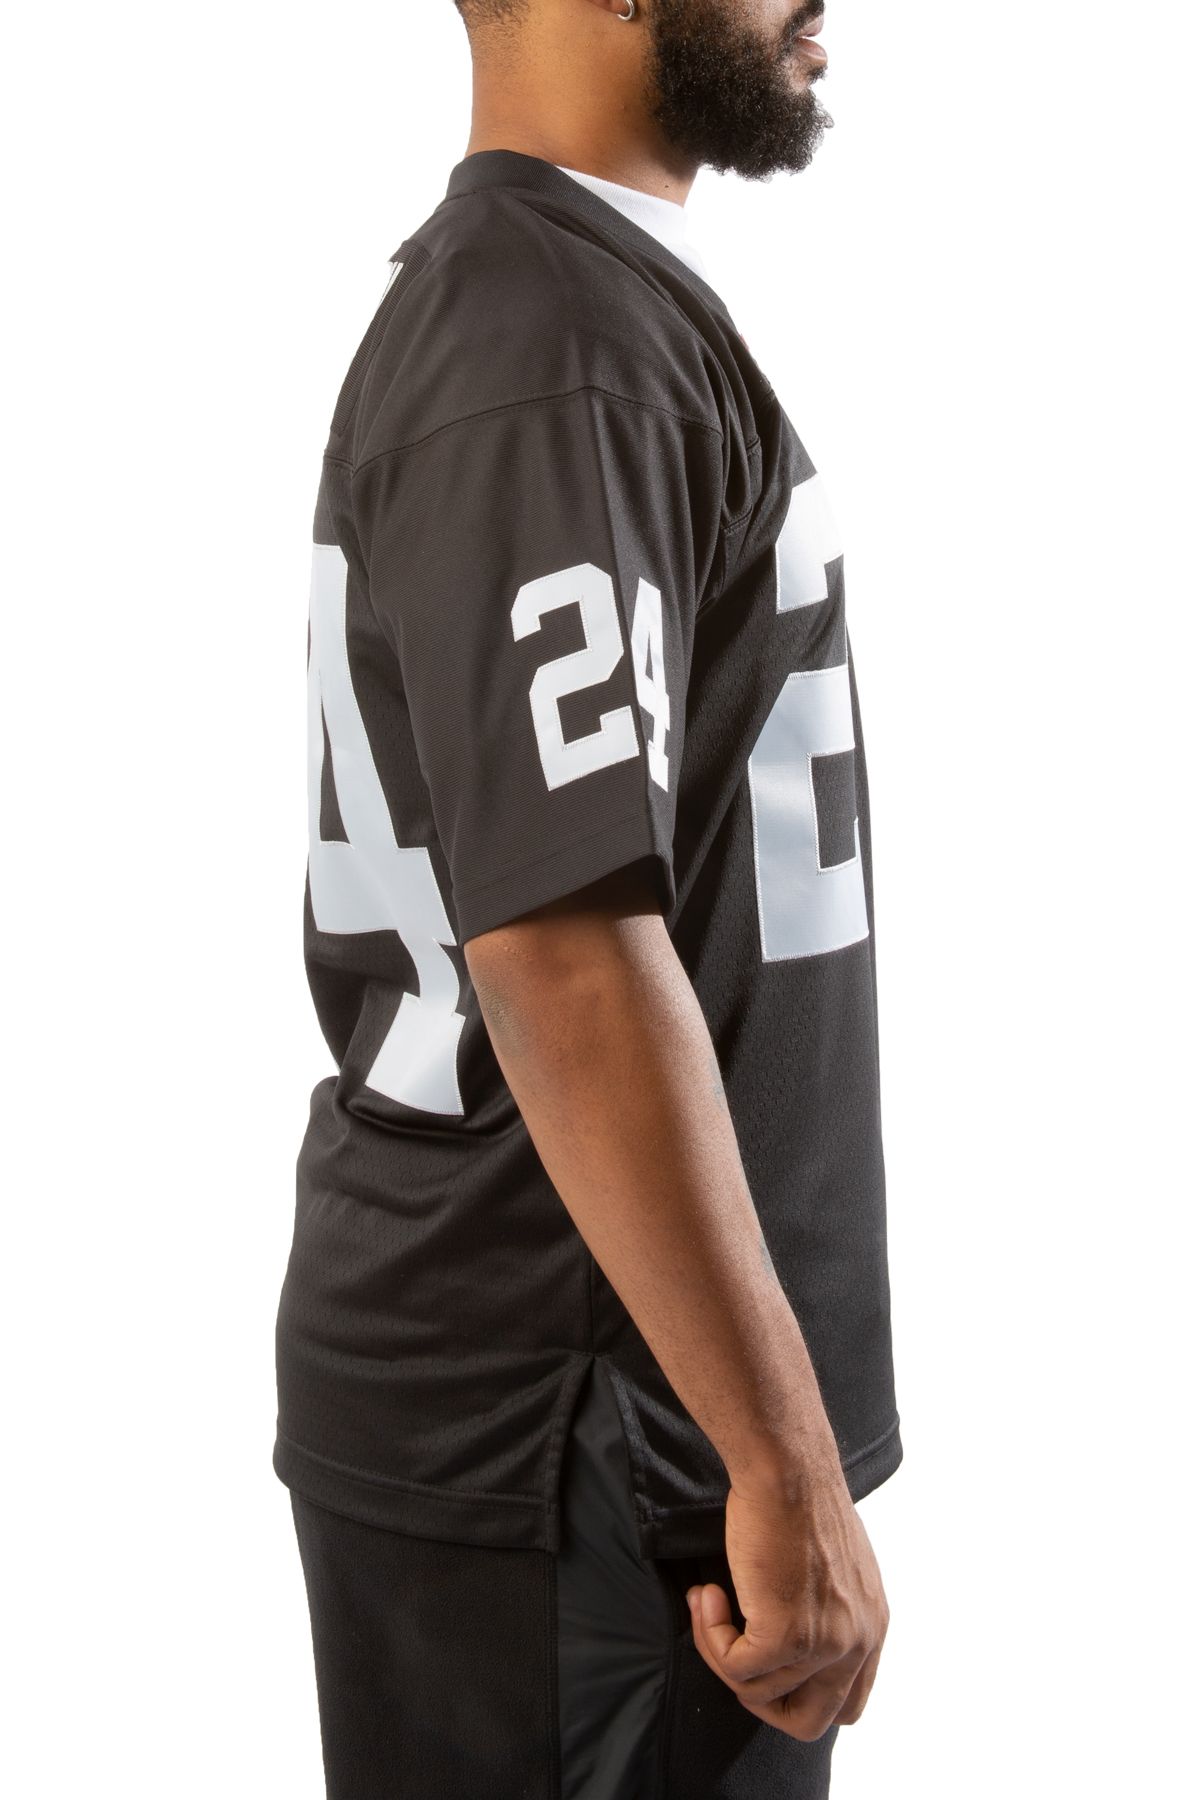 Mitchell & Ness Men's Mitchell & Ness Charles Woodson White Las Vegas  Raiders 2004 Authentic Throwback Retired Player Jersey, Nordstrom